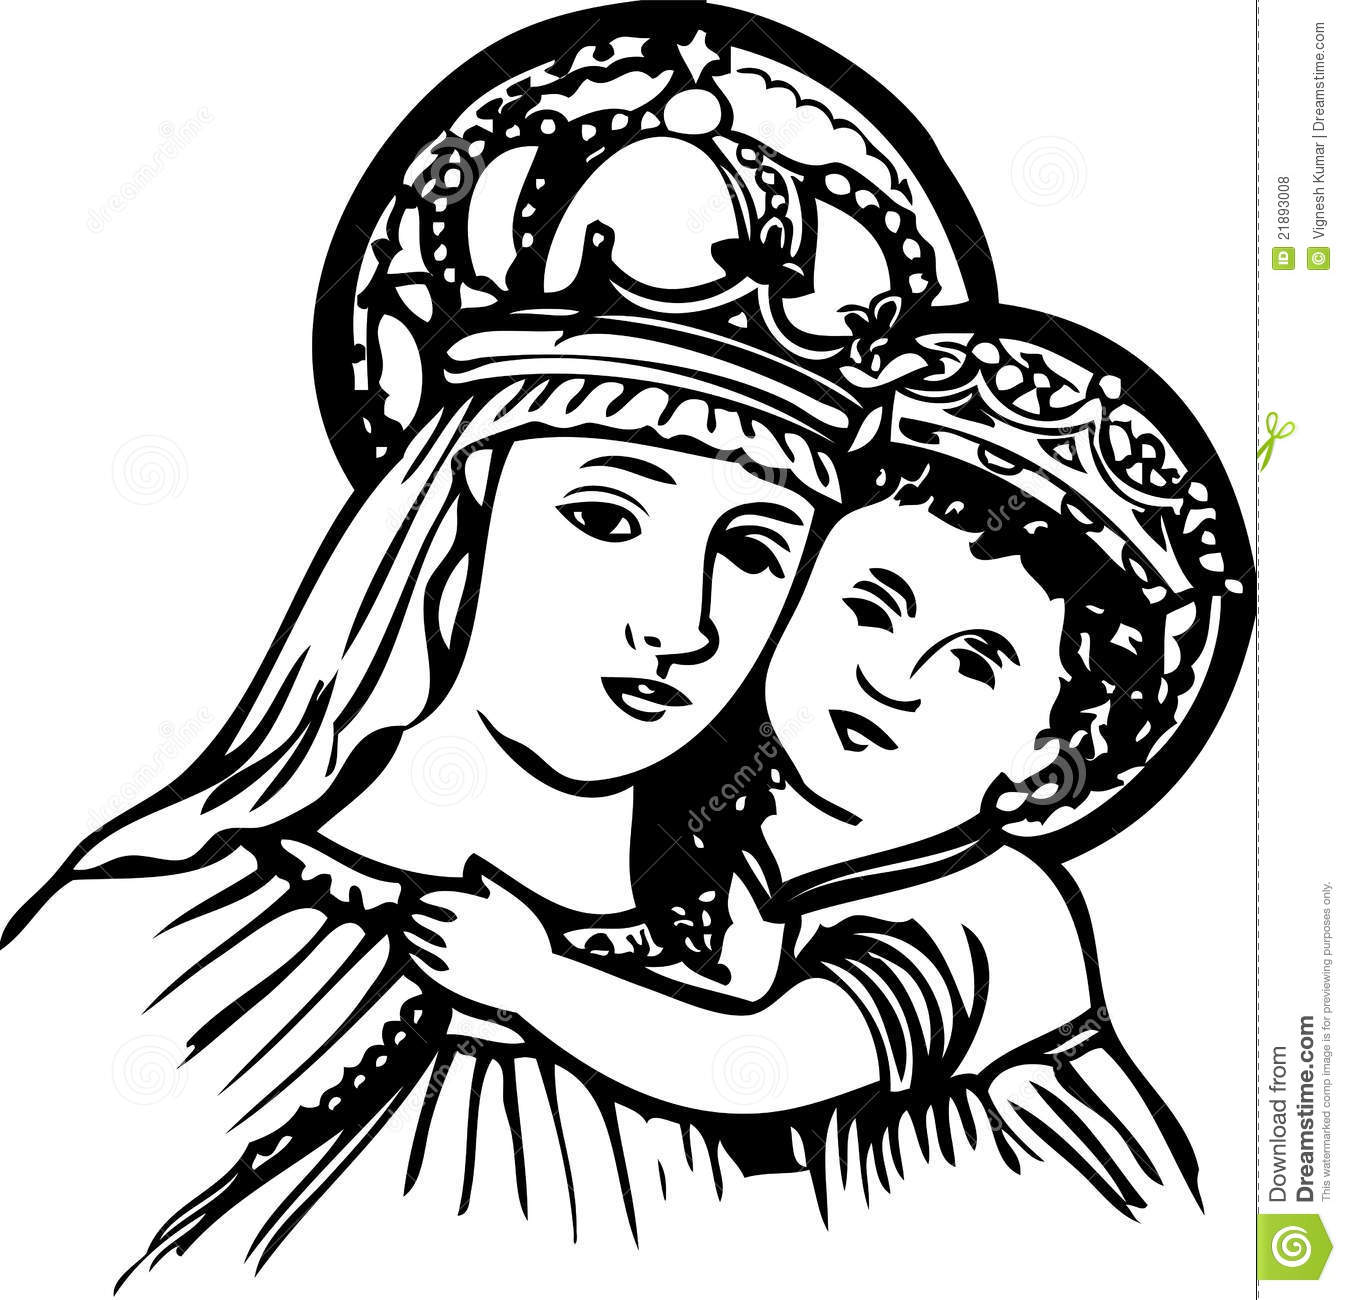 clipart images of virgin mary - photo #20